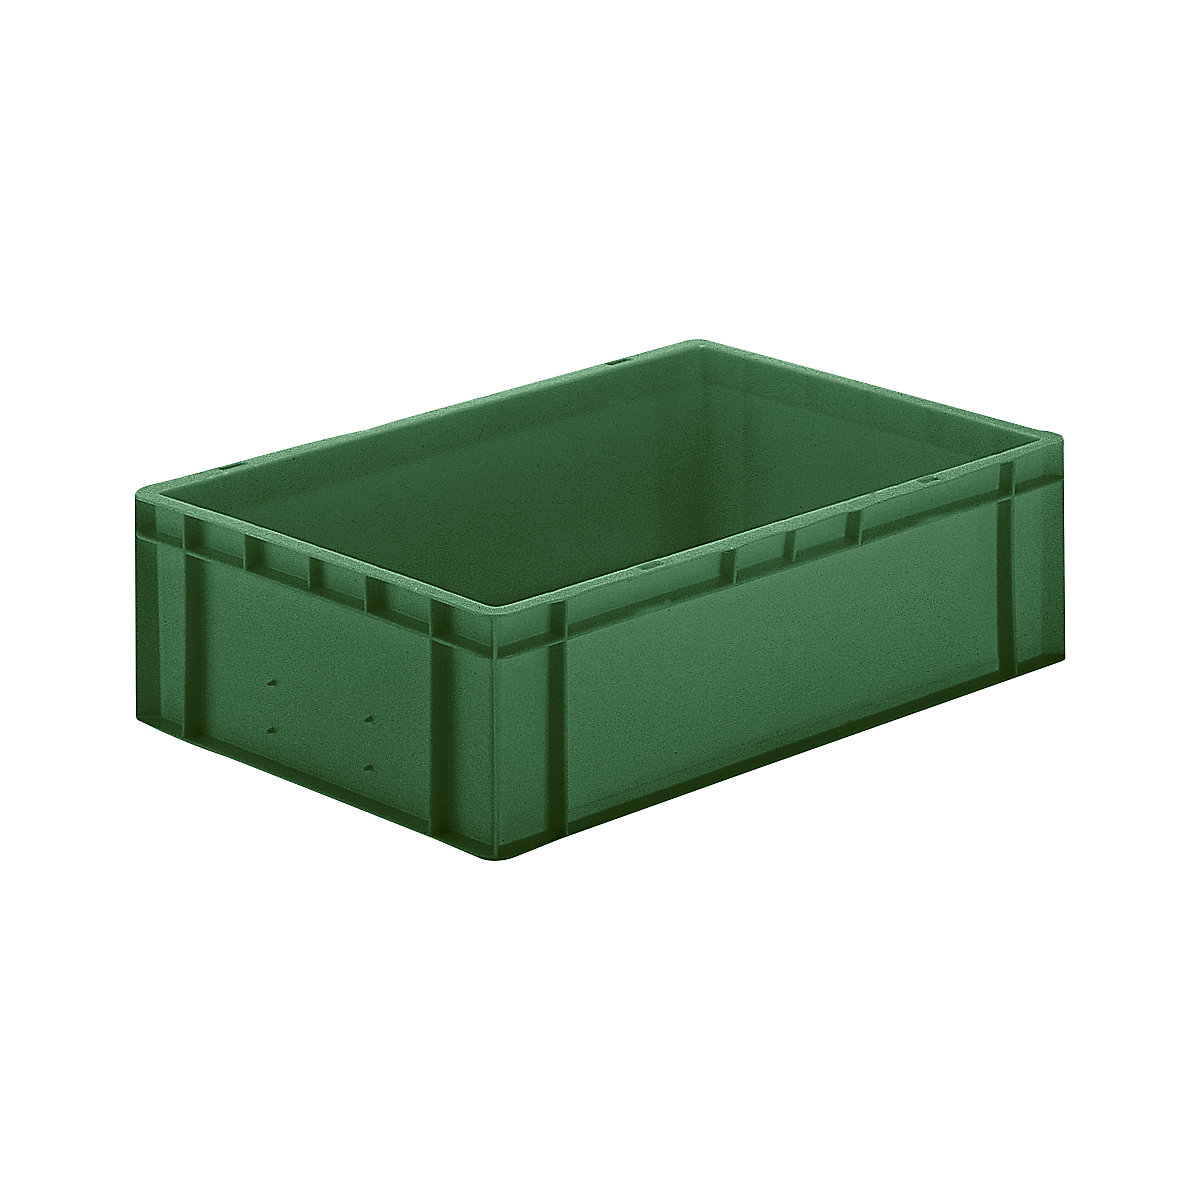 Euro stacking container, closed walls and base